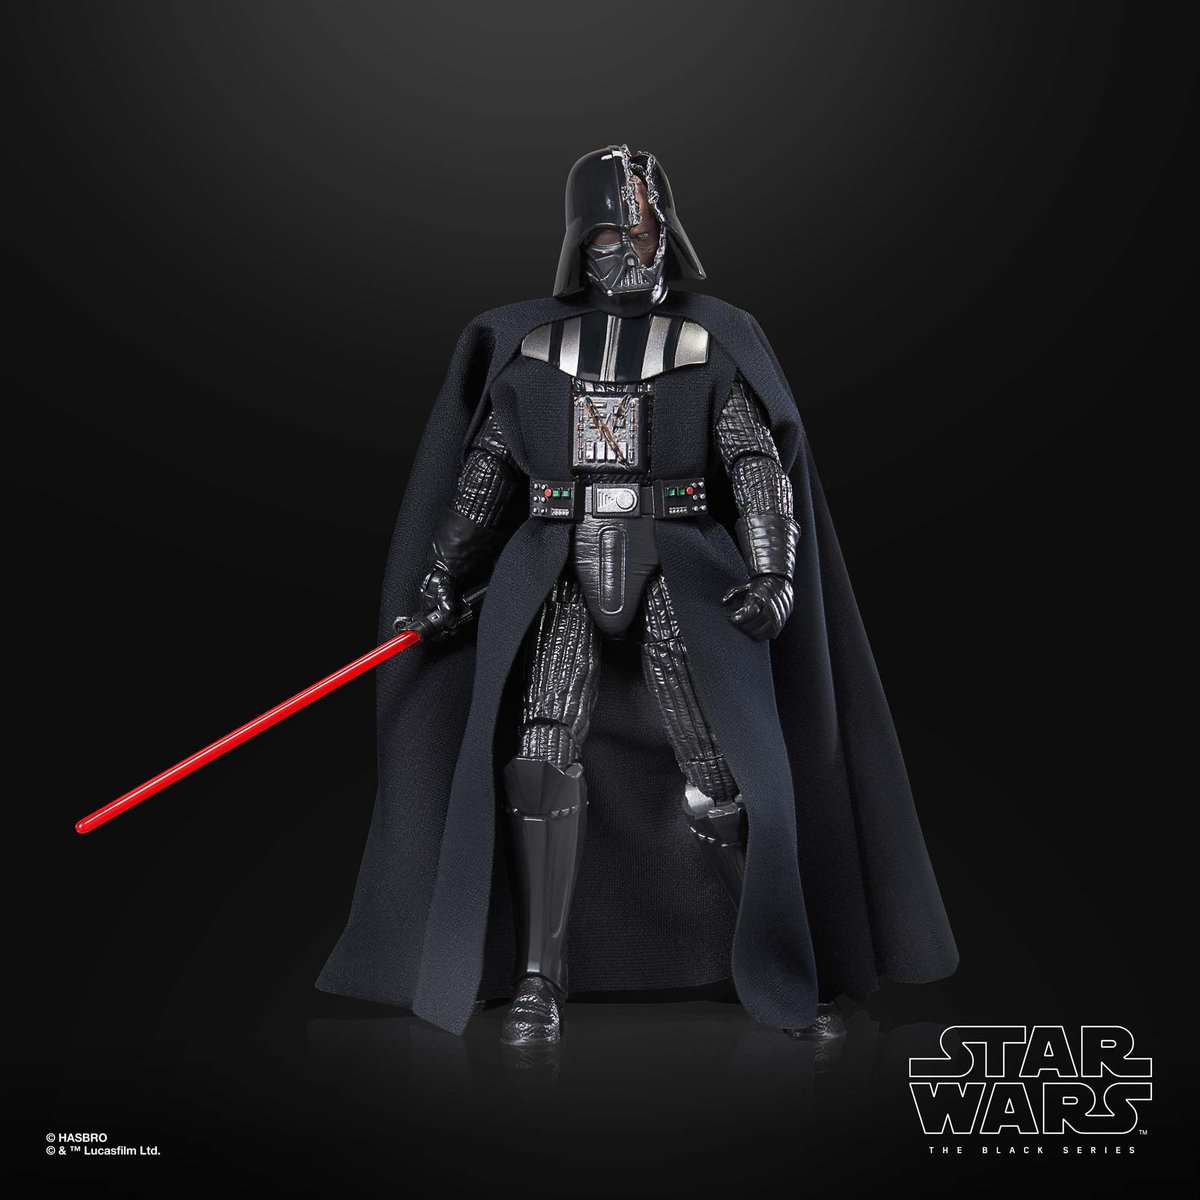 Introducing two new products from Hasbro’s Star Wars The Black Series! From Obi-Wan Kenobi, here’s Commander Appo and Darth Vader (Duel’s End). Both are fall release Target exclusives, with preorders going live on 7/14 at 9AM ET. Thanks to Hasbro for the promotional images.